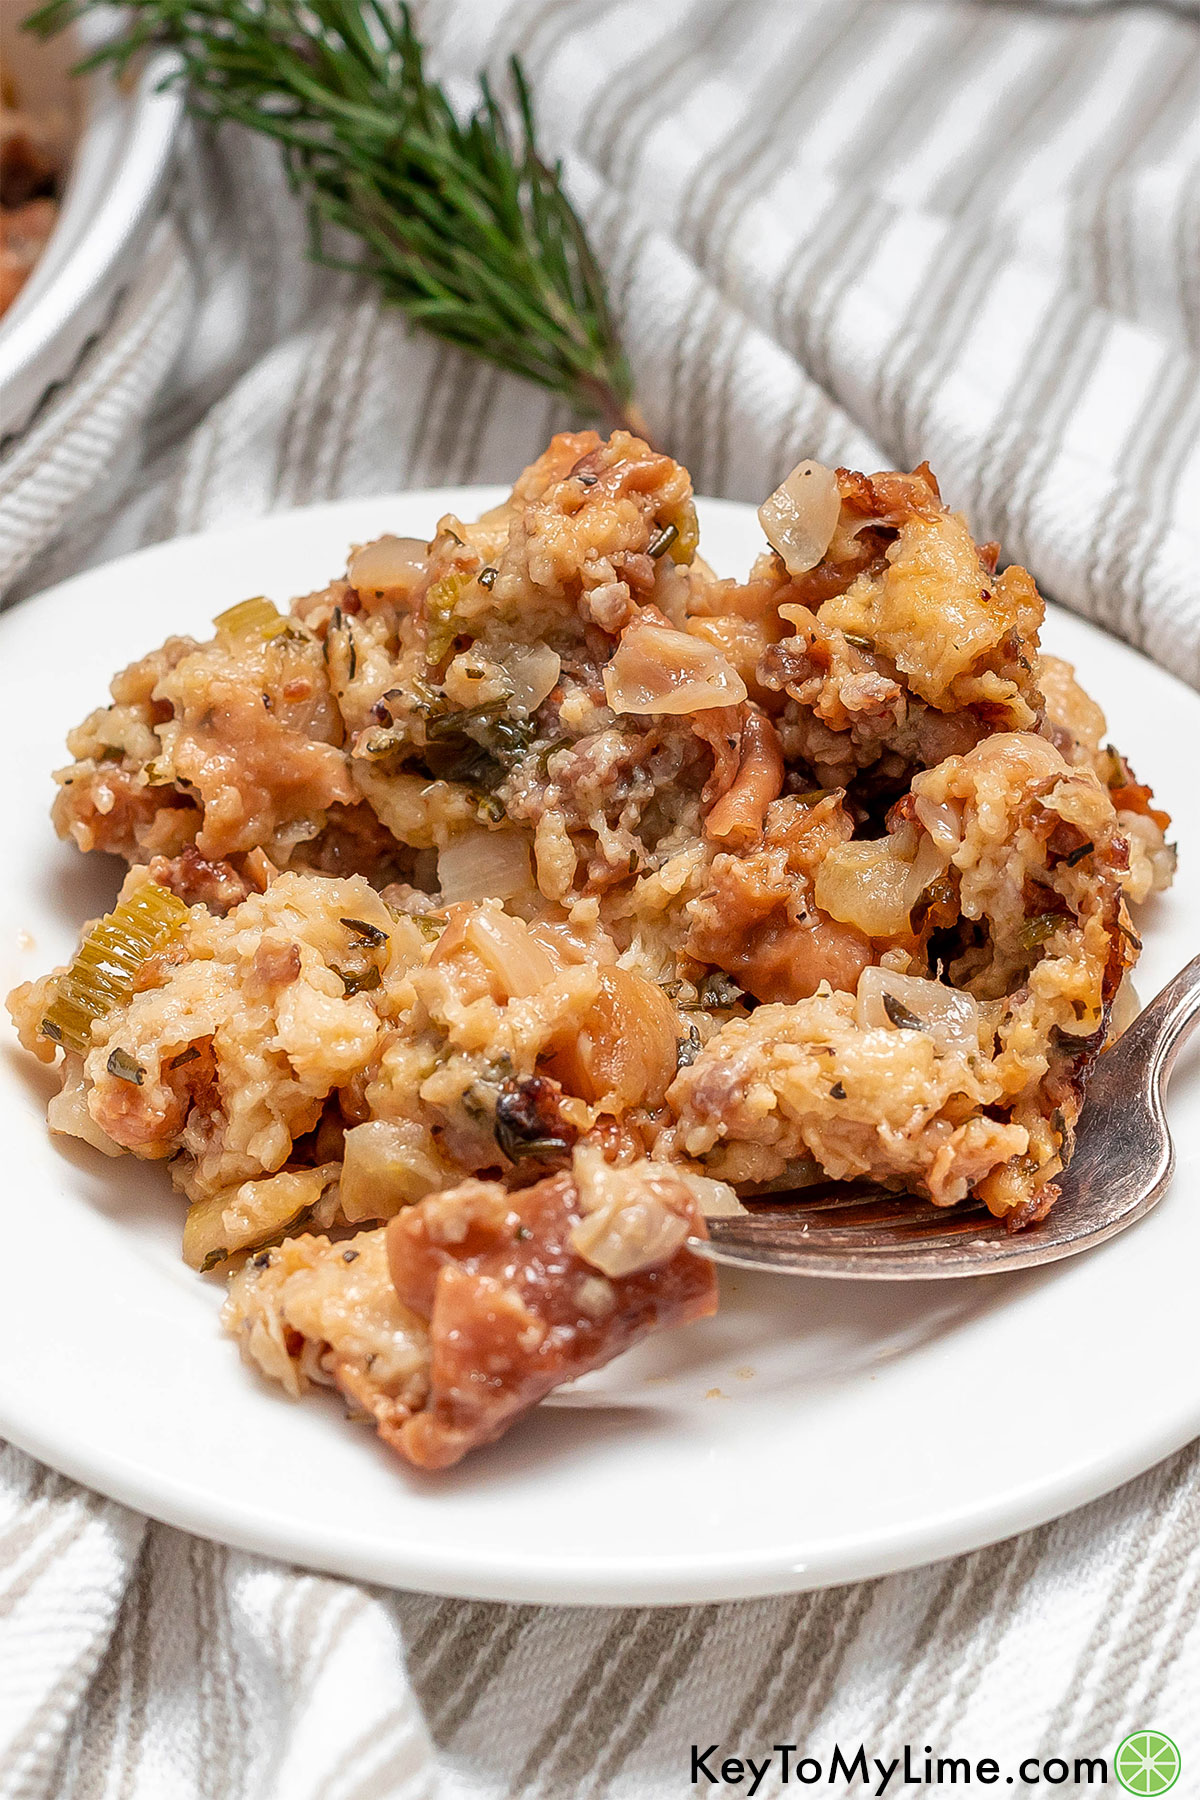 A serving of stuffing on a white dish showing the texture of the stuffing.